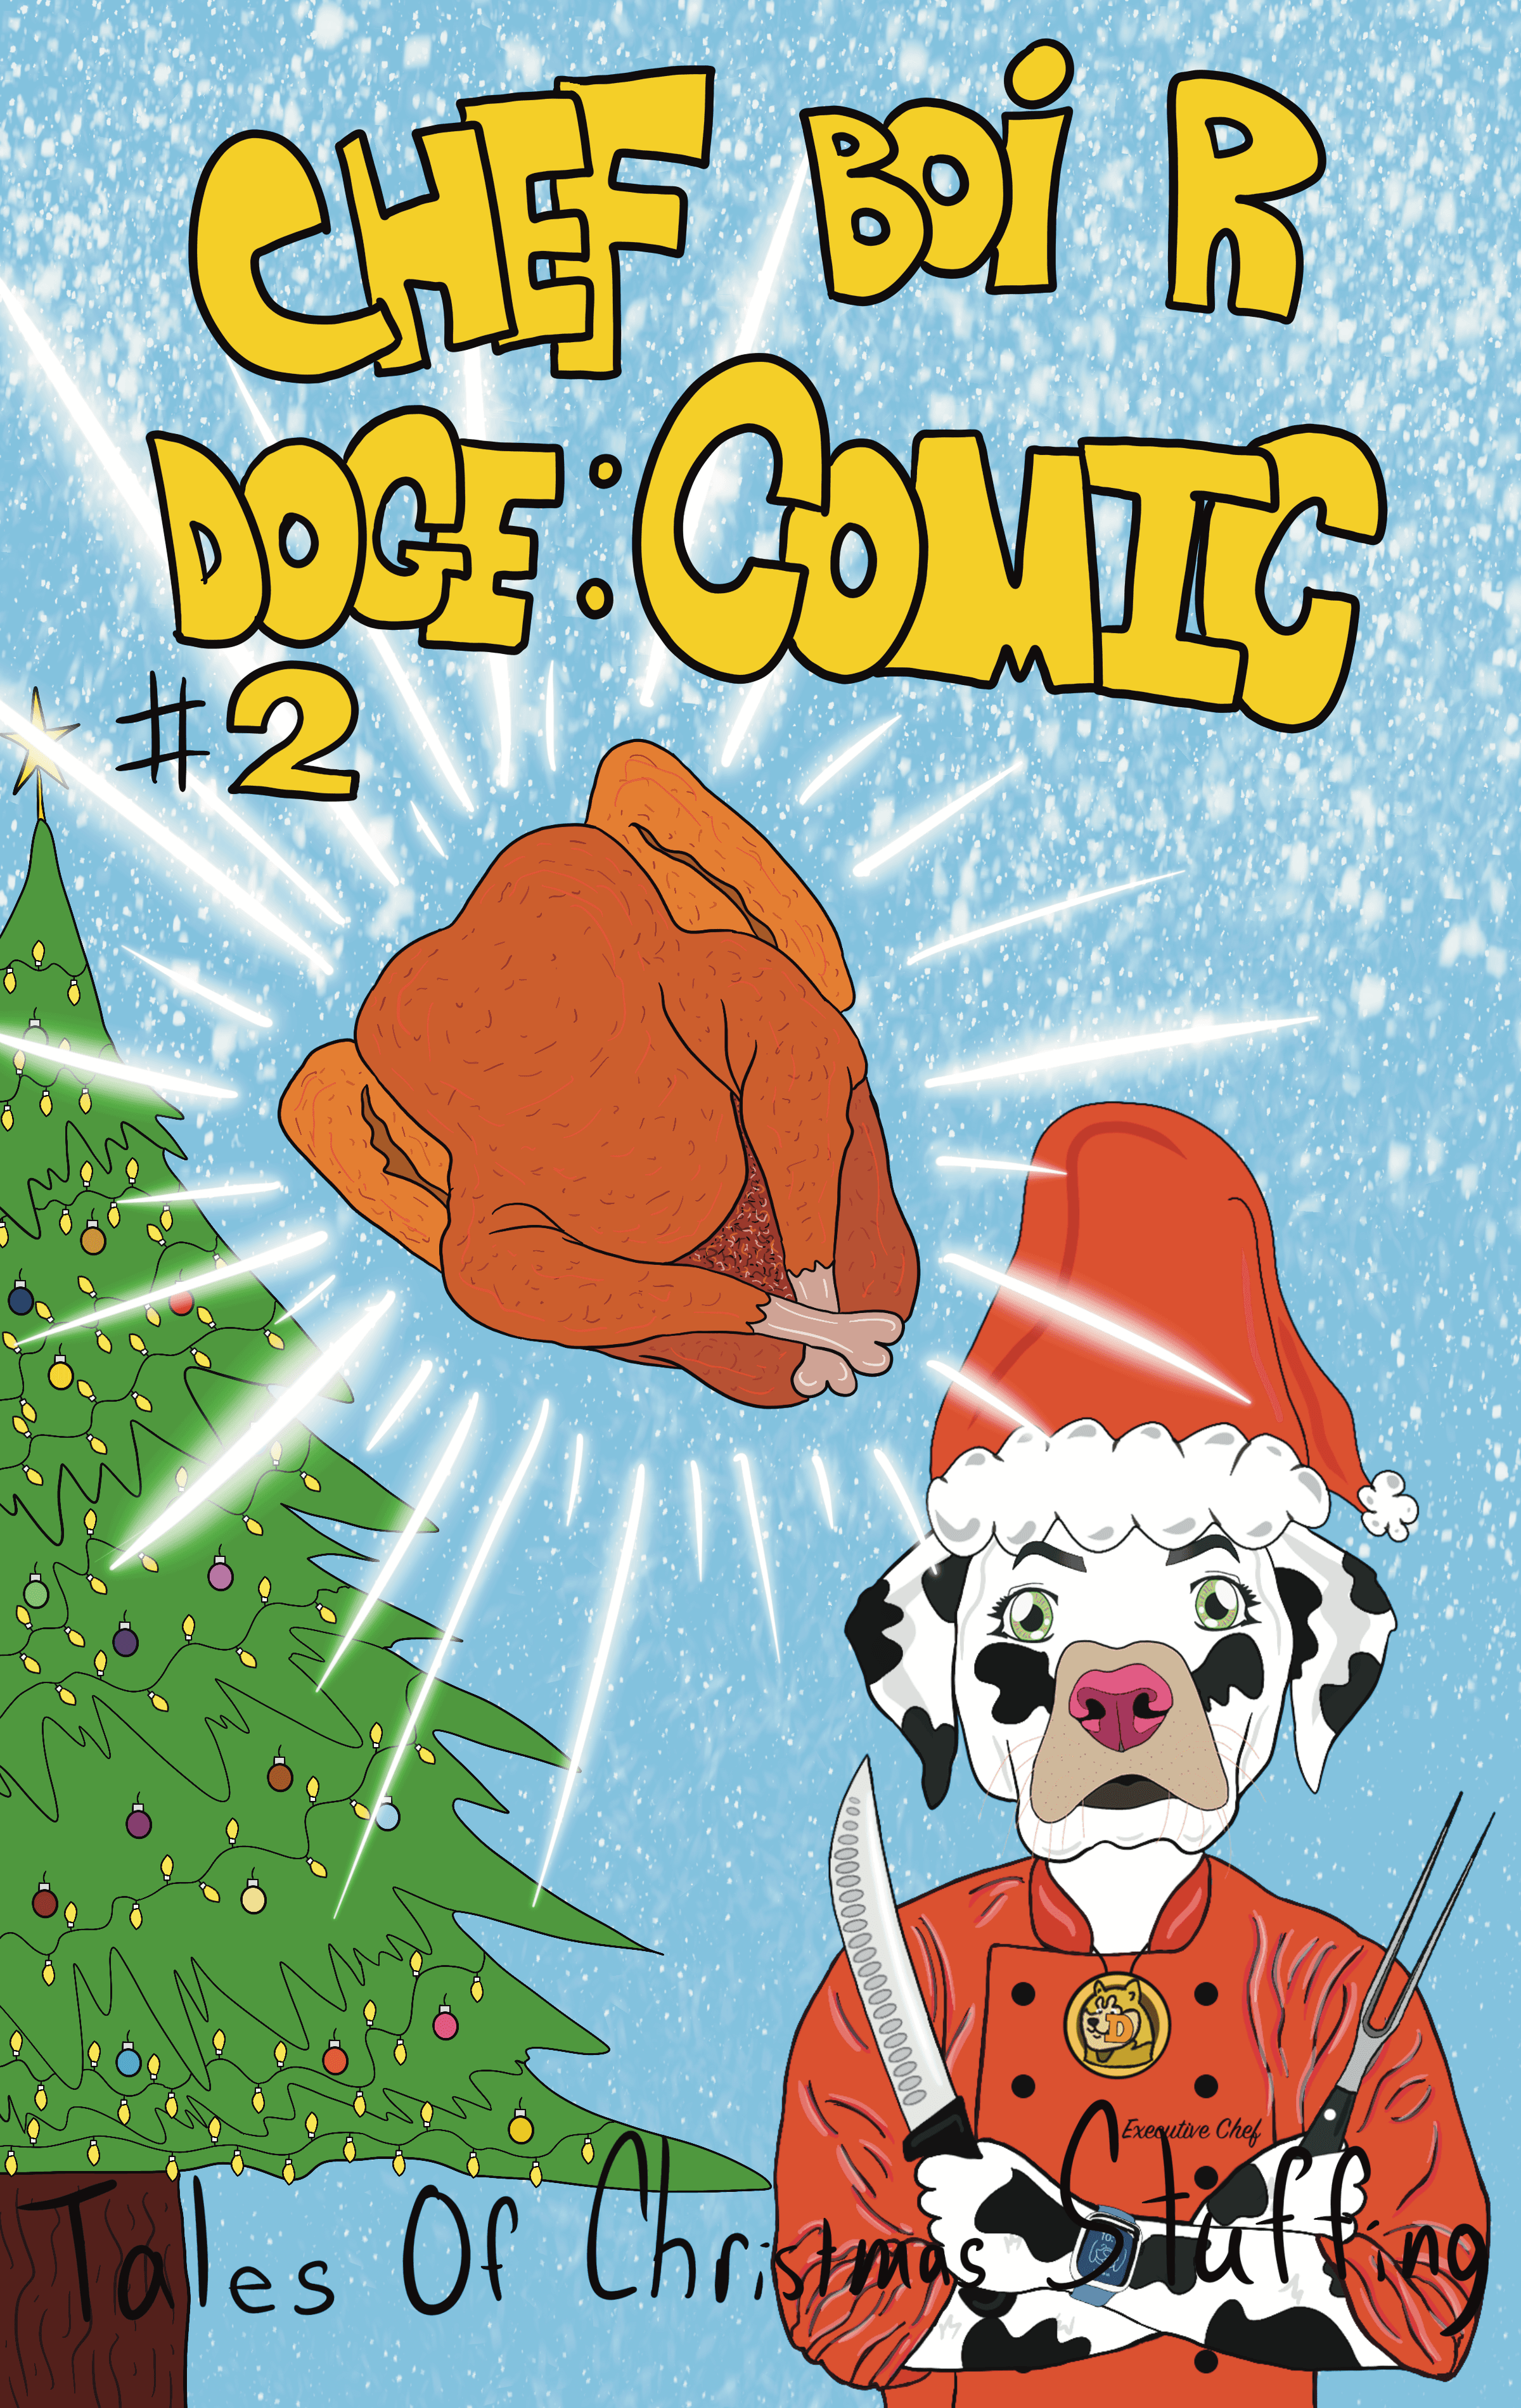 Chef Boi R Doge: Comic #2: Tales Of Christmas Stuffing 